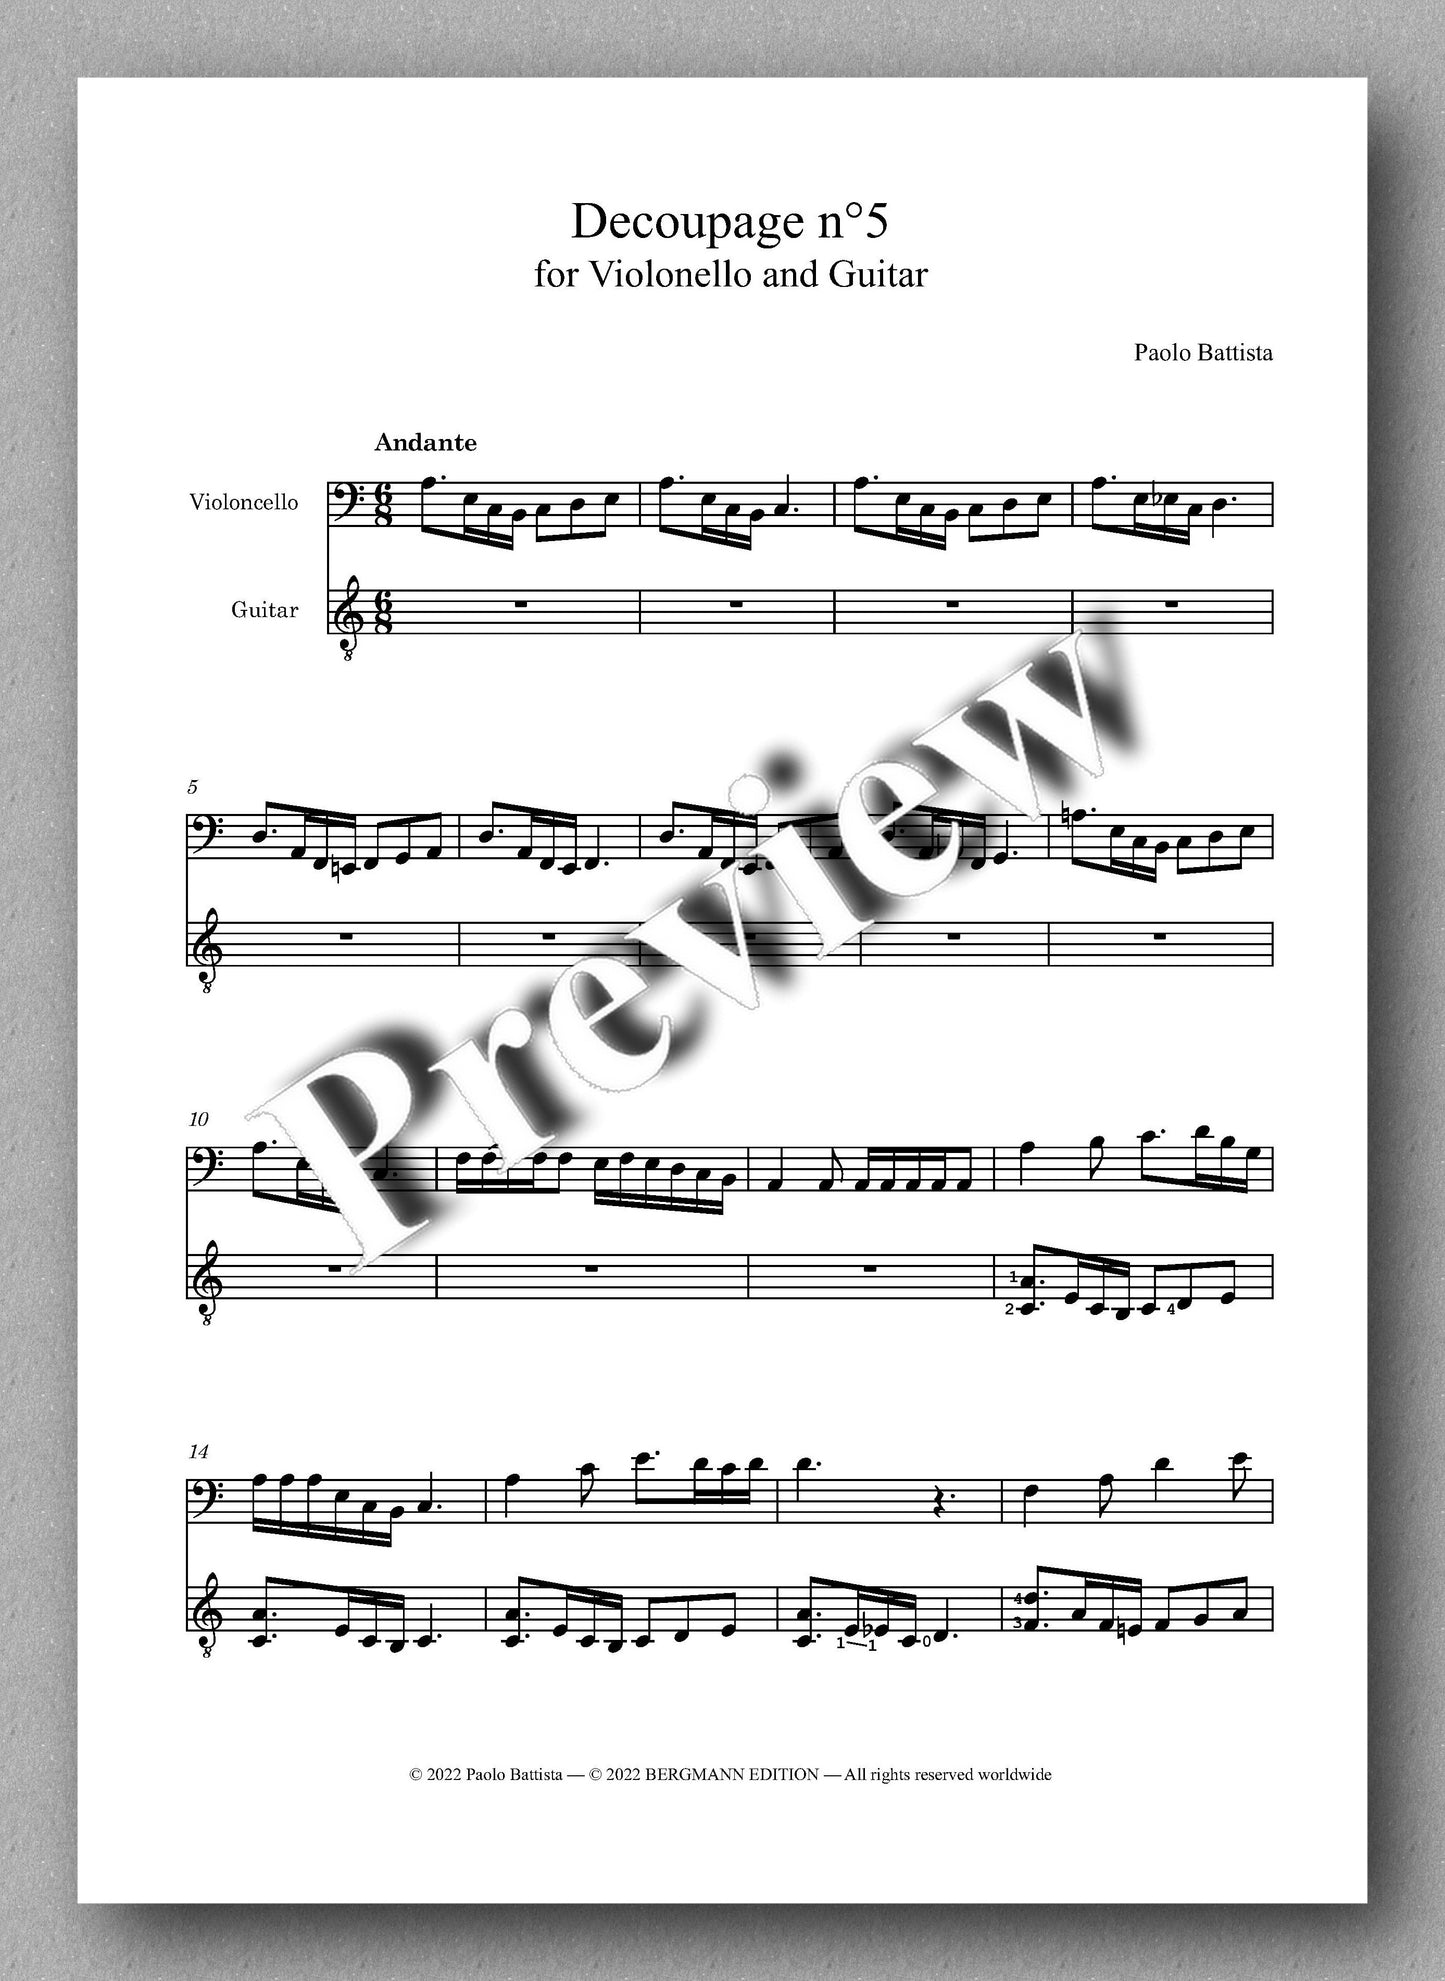 Decoupage n° 5 by Paolo Battista - preview of the music score